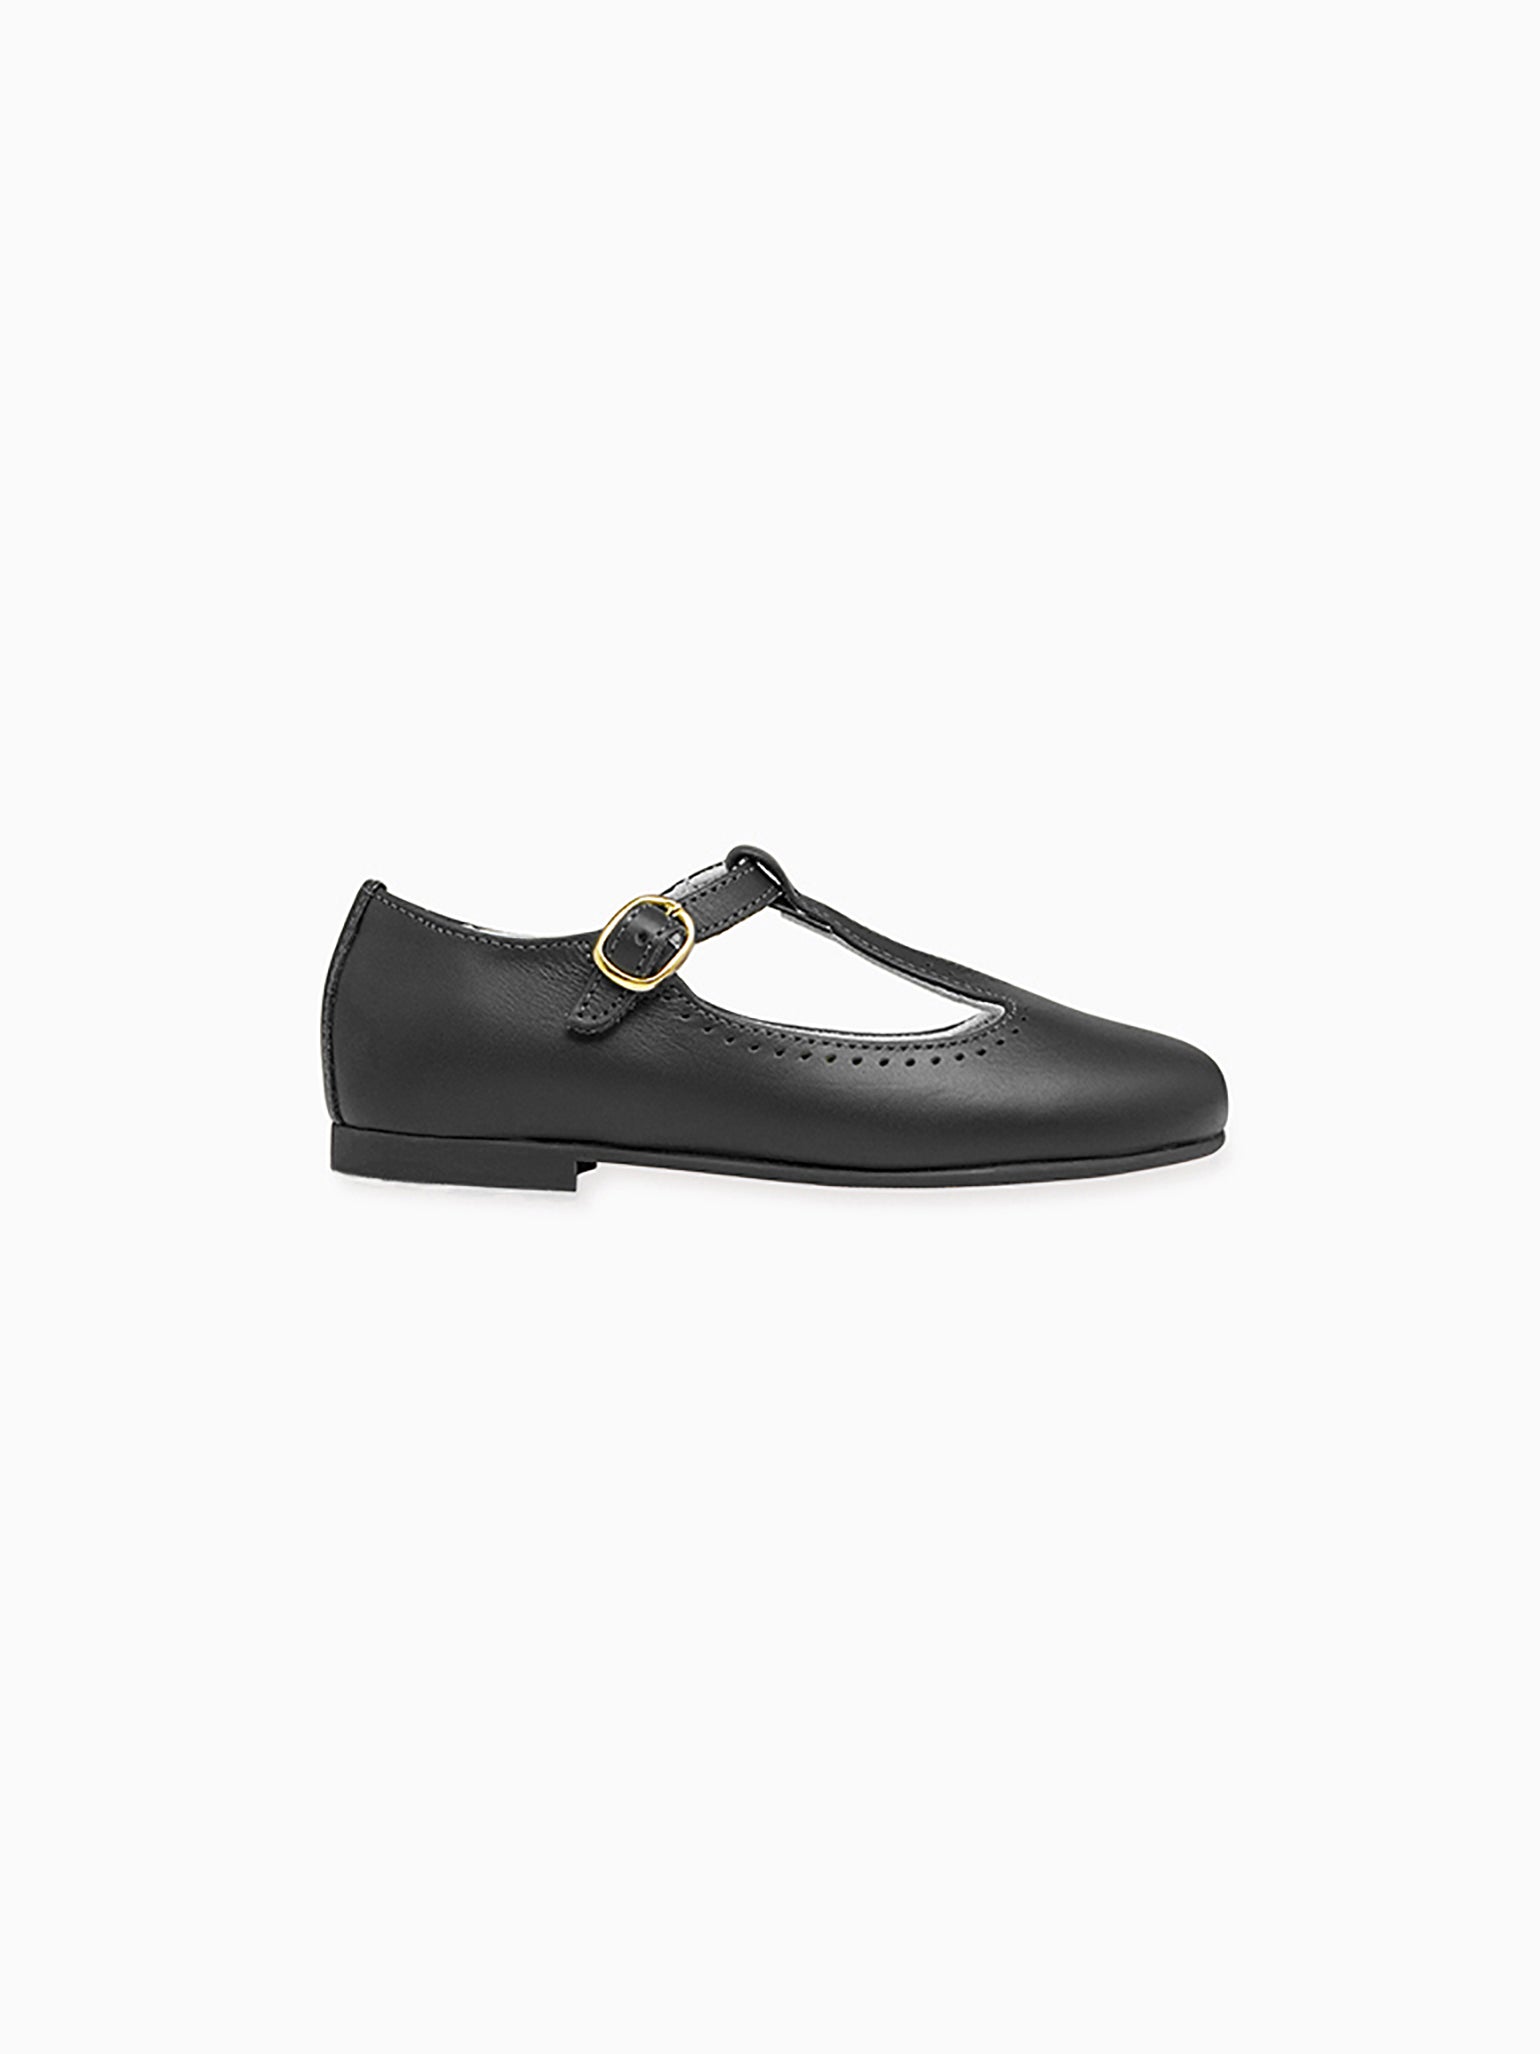 Black Leather Girl T-Bar Shoes